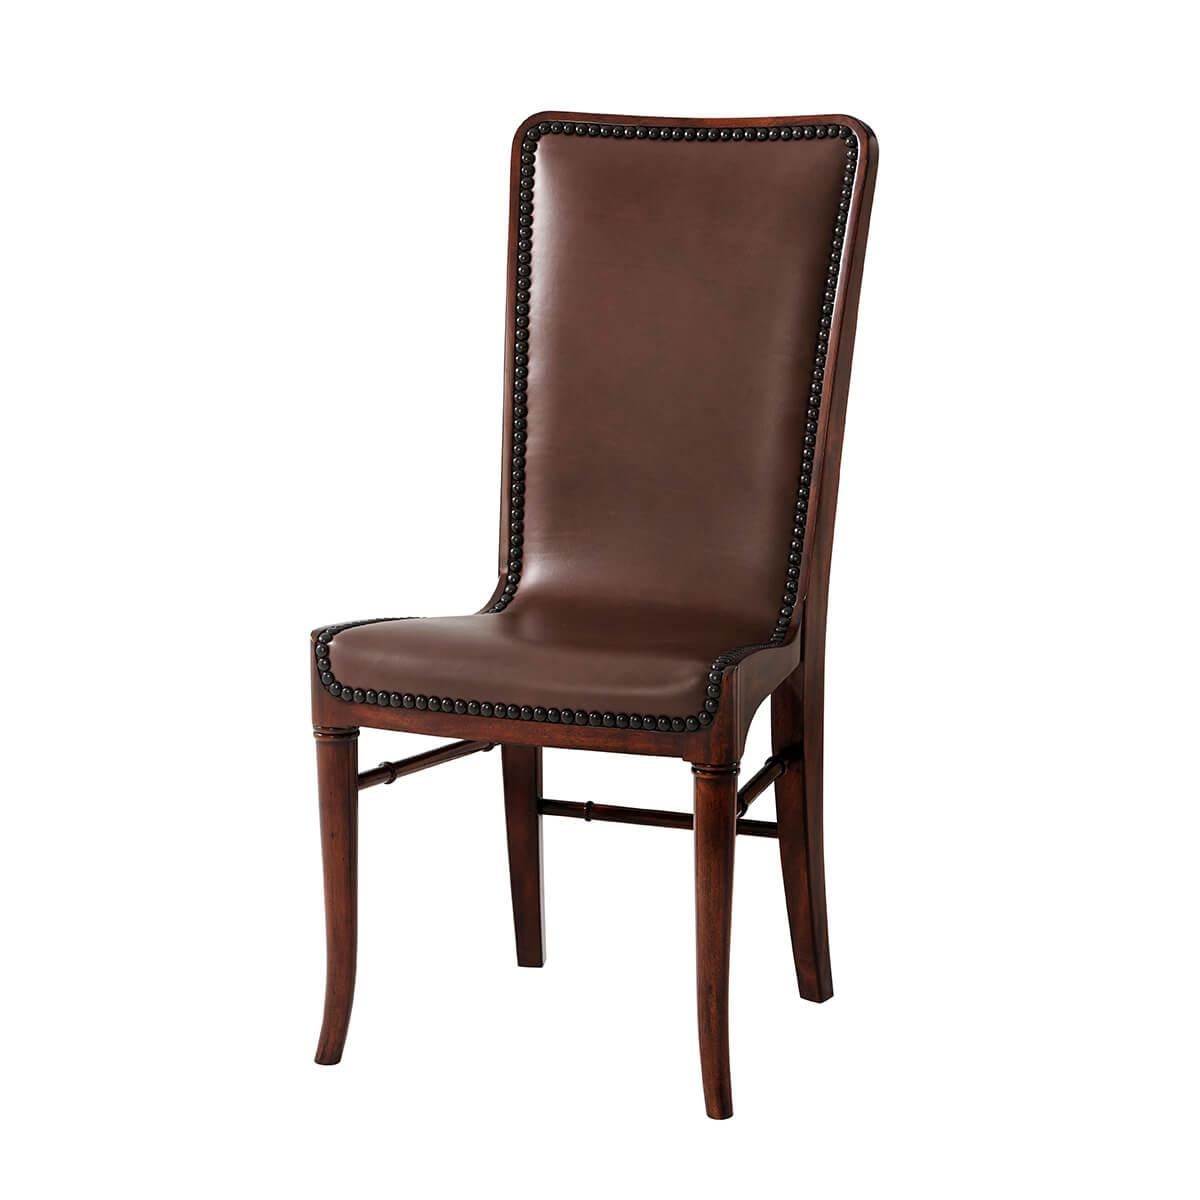  the upholstered sling back and seat with nailhead decoration, the reverse with hair on hide leather, on turned and splayed legs.  

Dimensions: 19.75